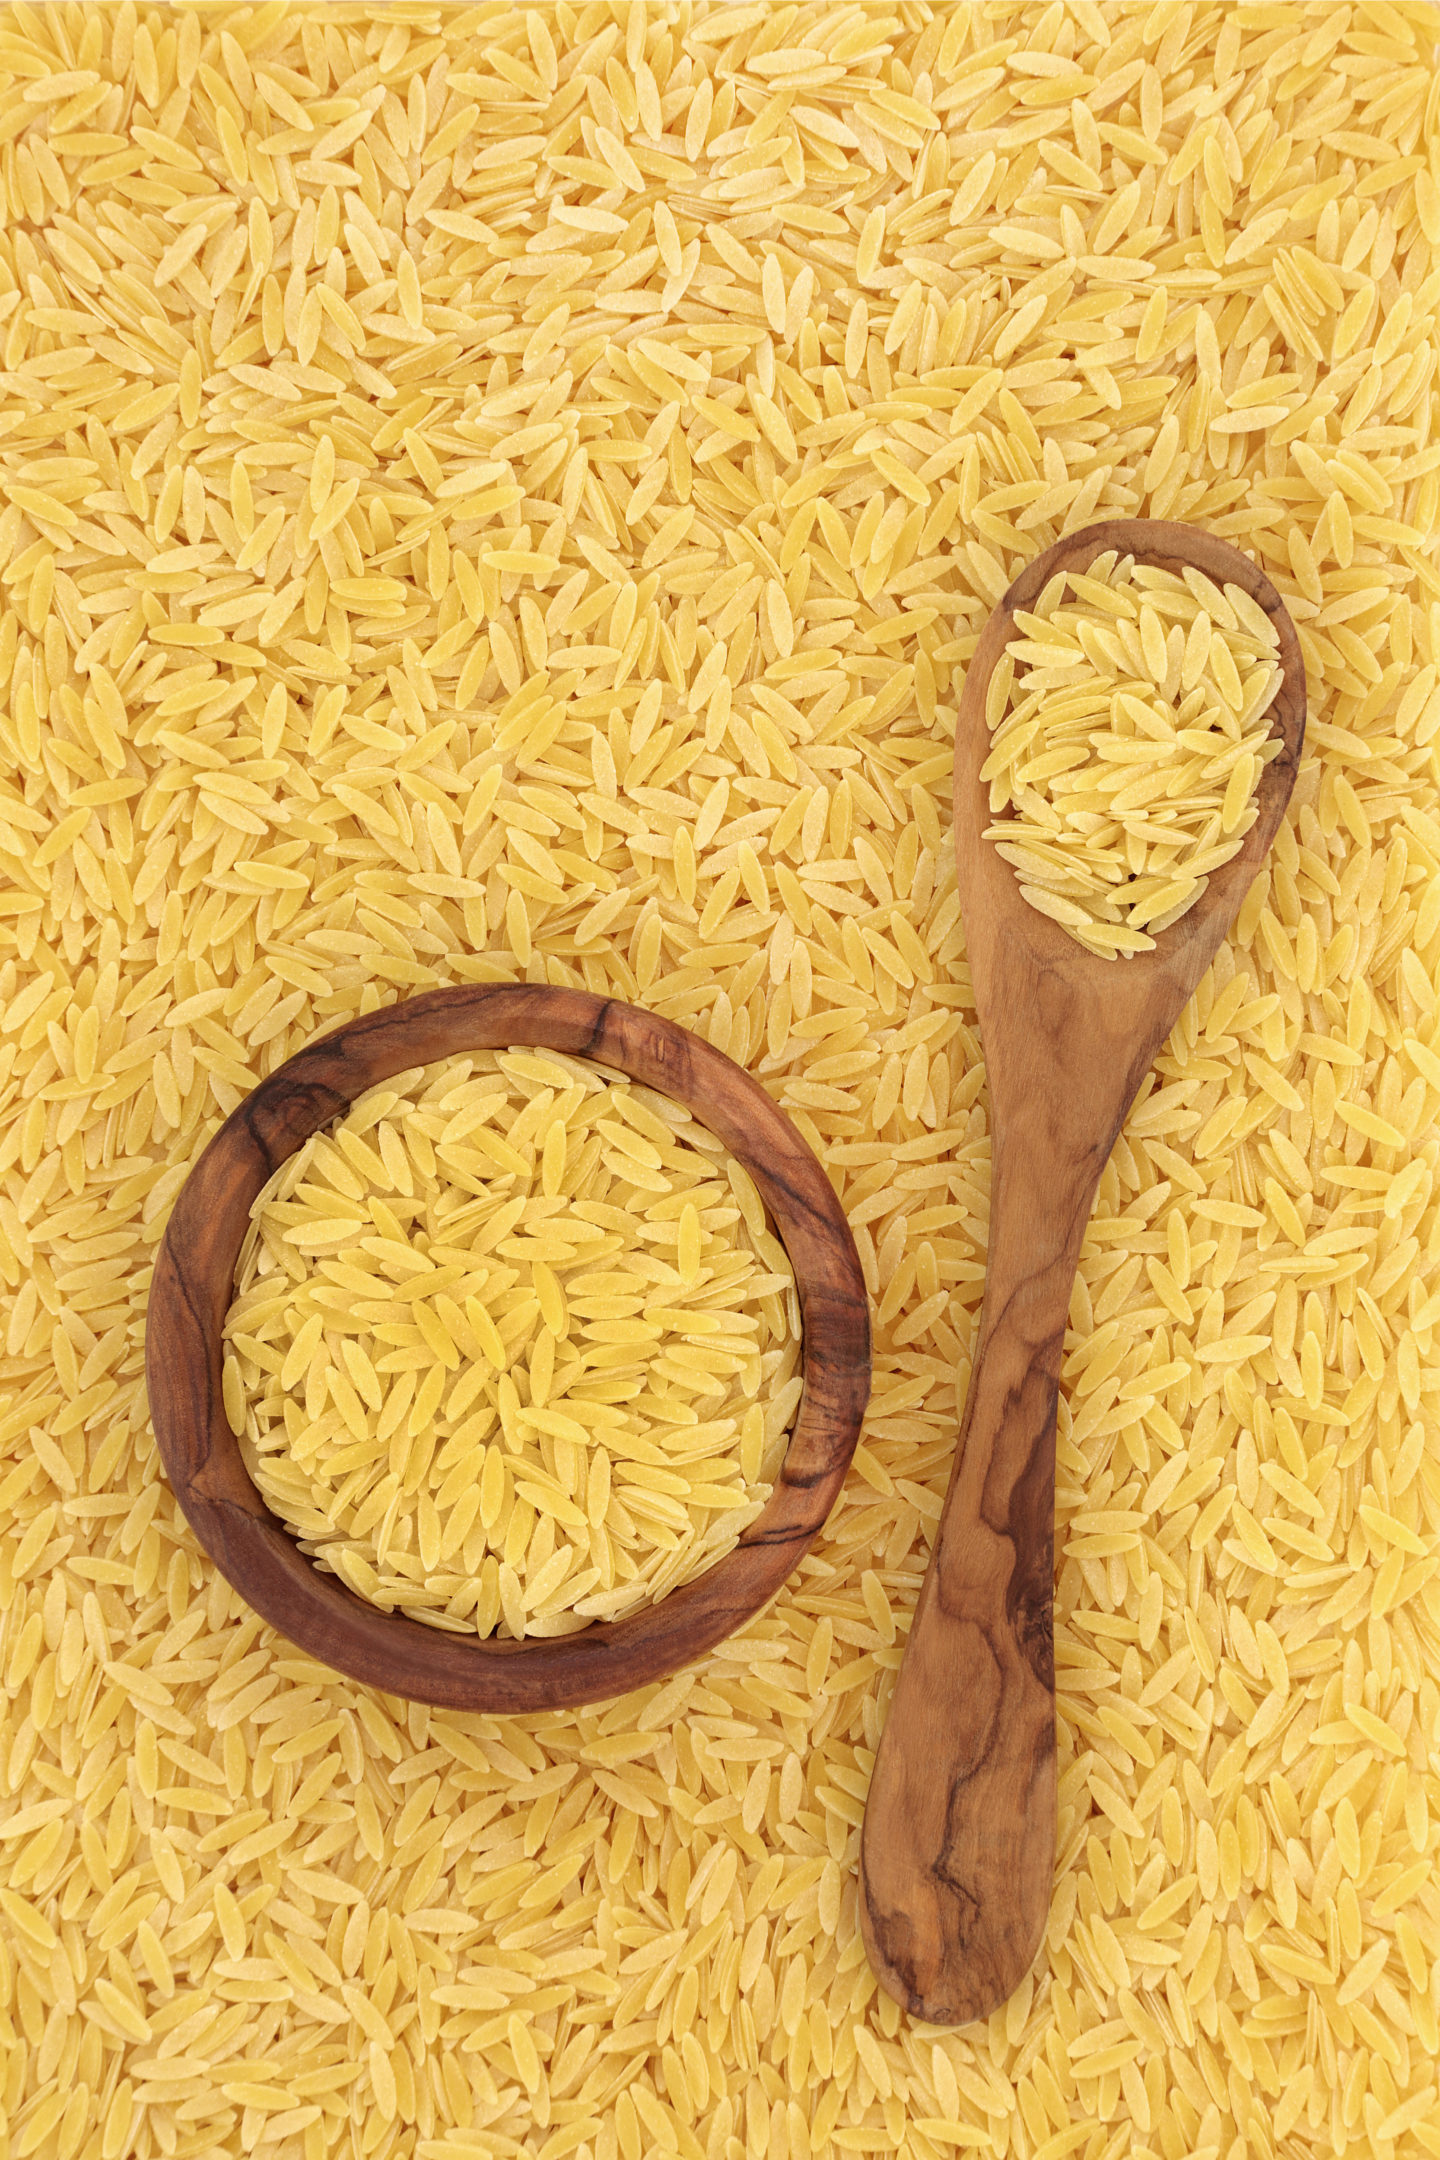 Gluten Free Orzo In Bowl Spoon And Surface